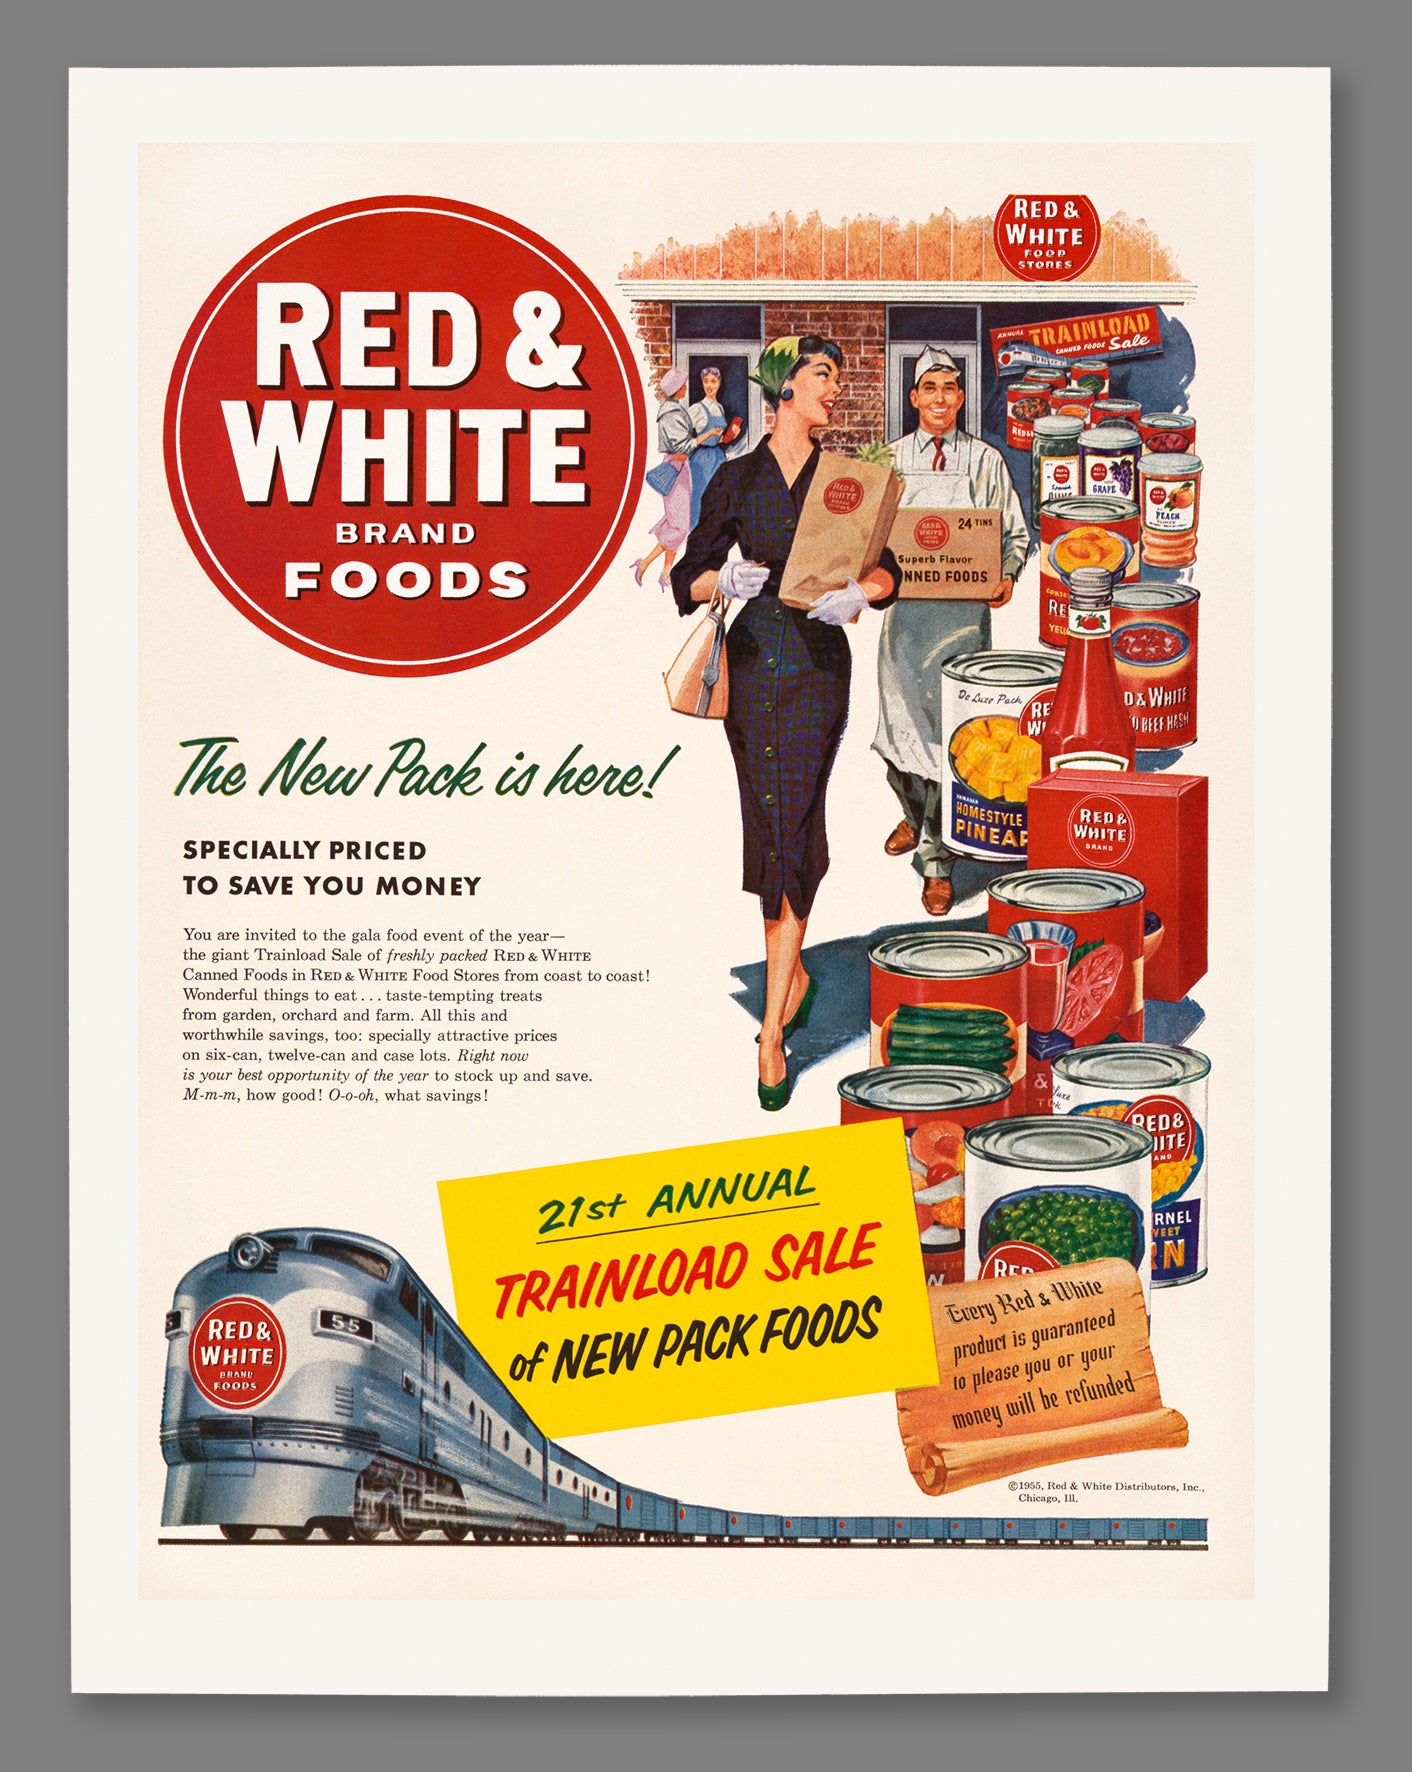 A reproduction print on paper of a vintage poster for Red and White Brand Foods